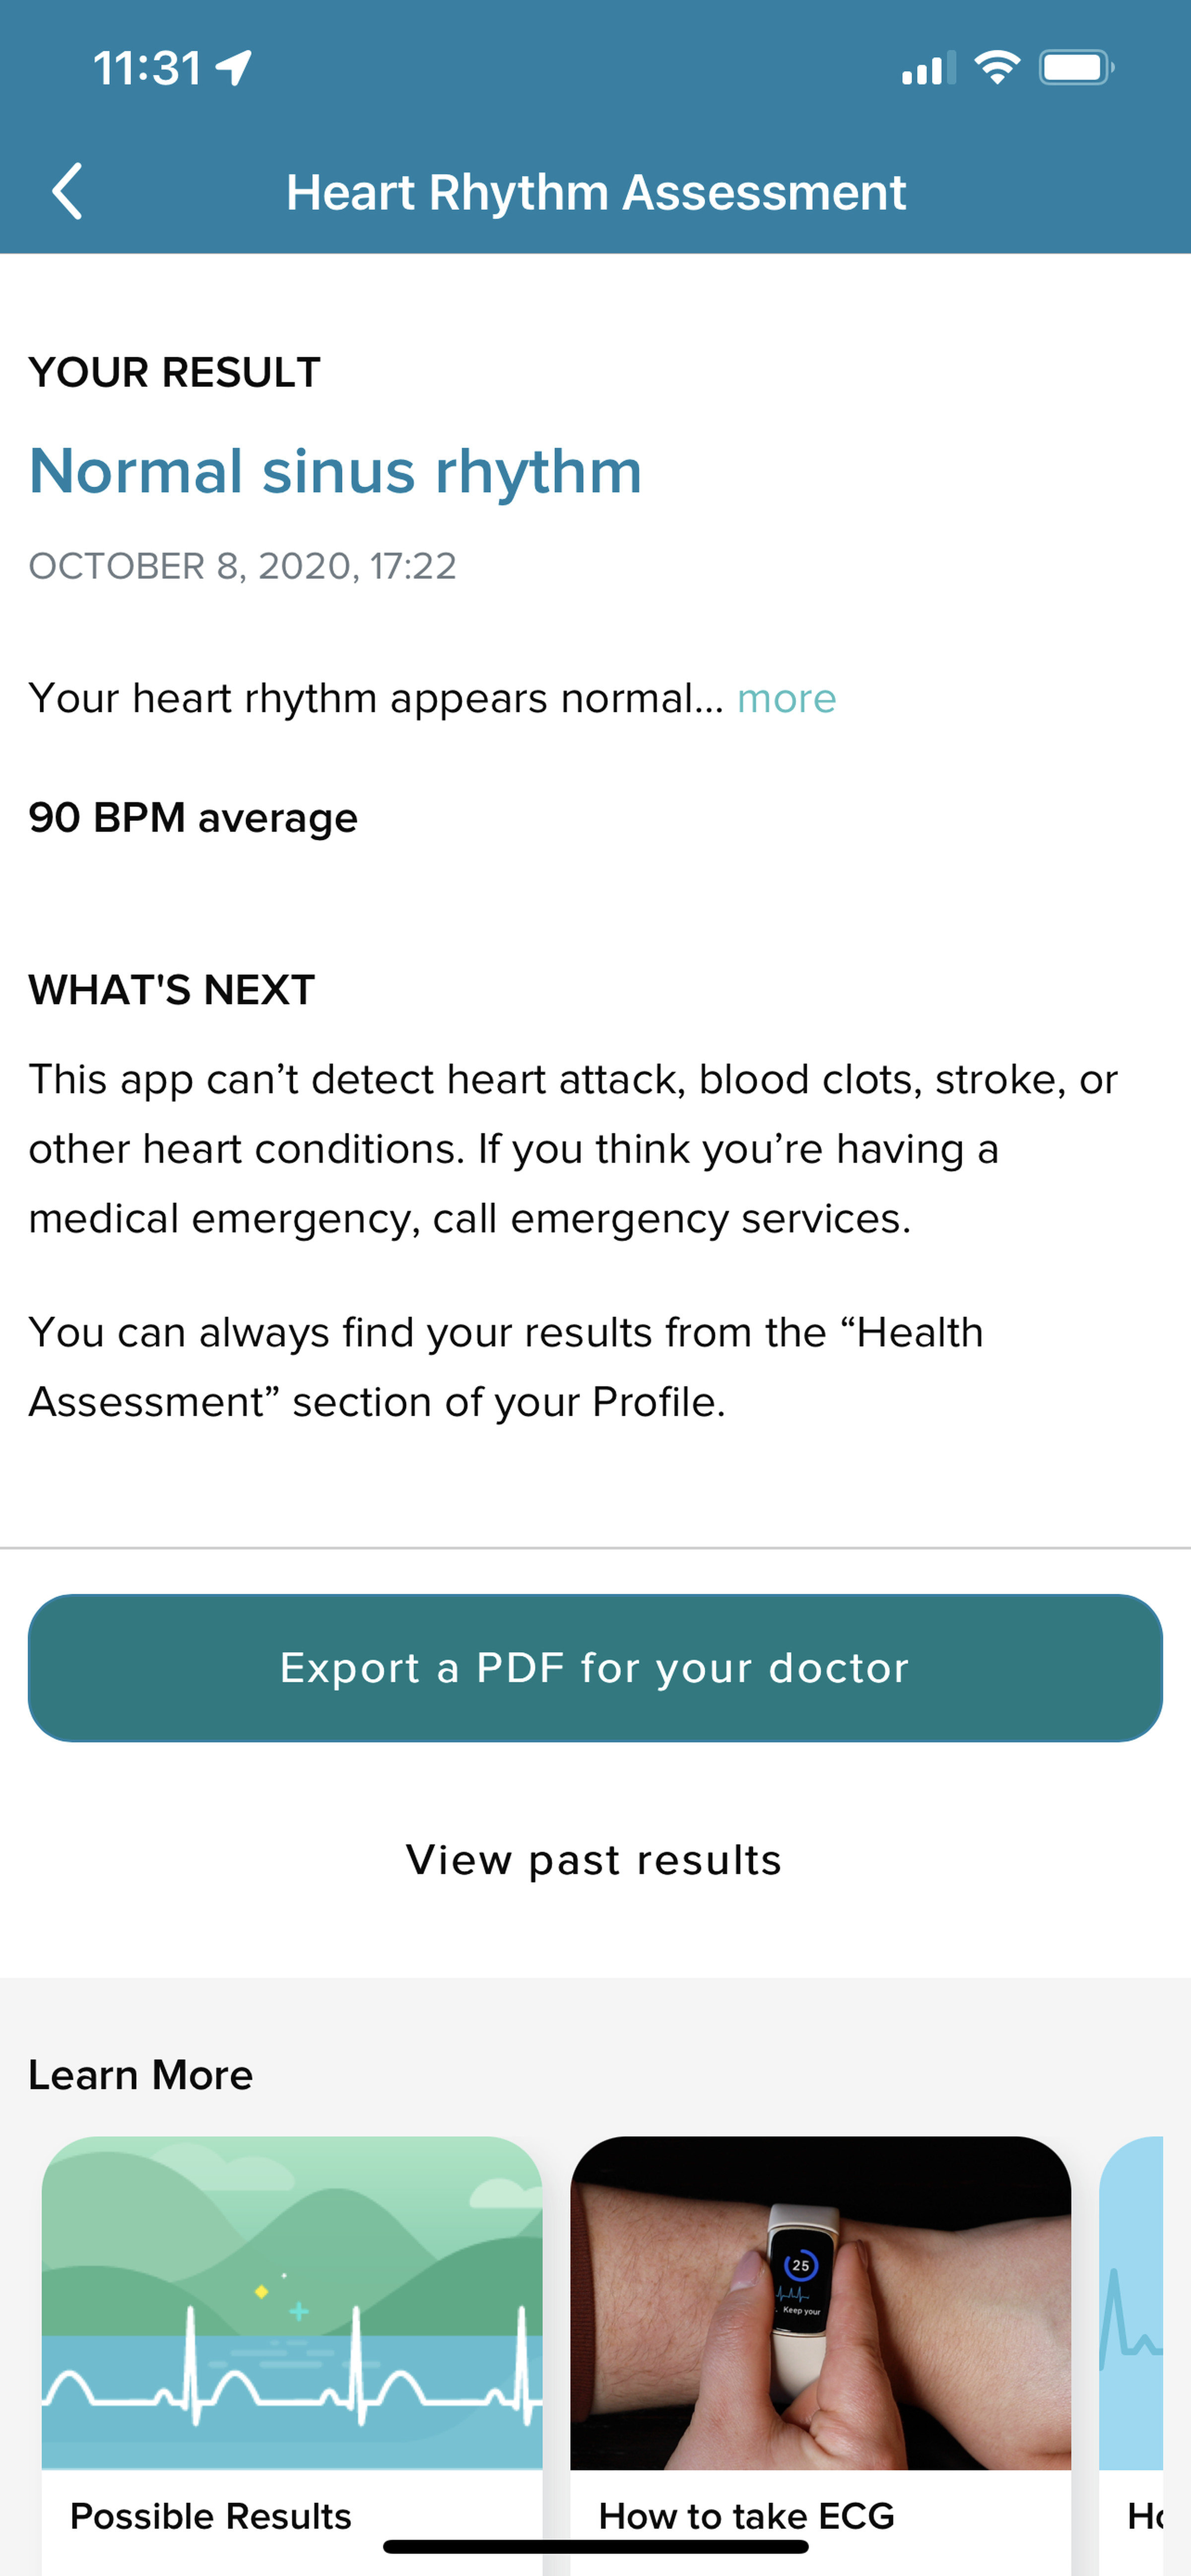 You can export your EKG results to a PDF and send it to your doctor